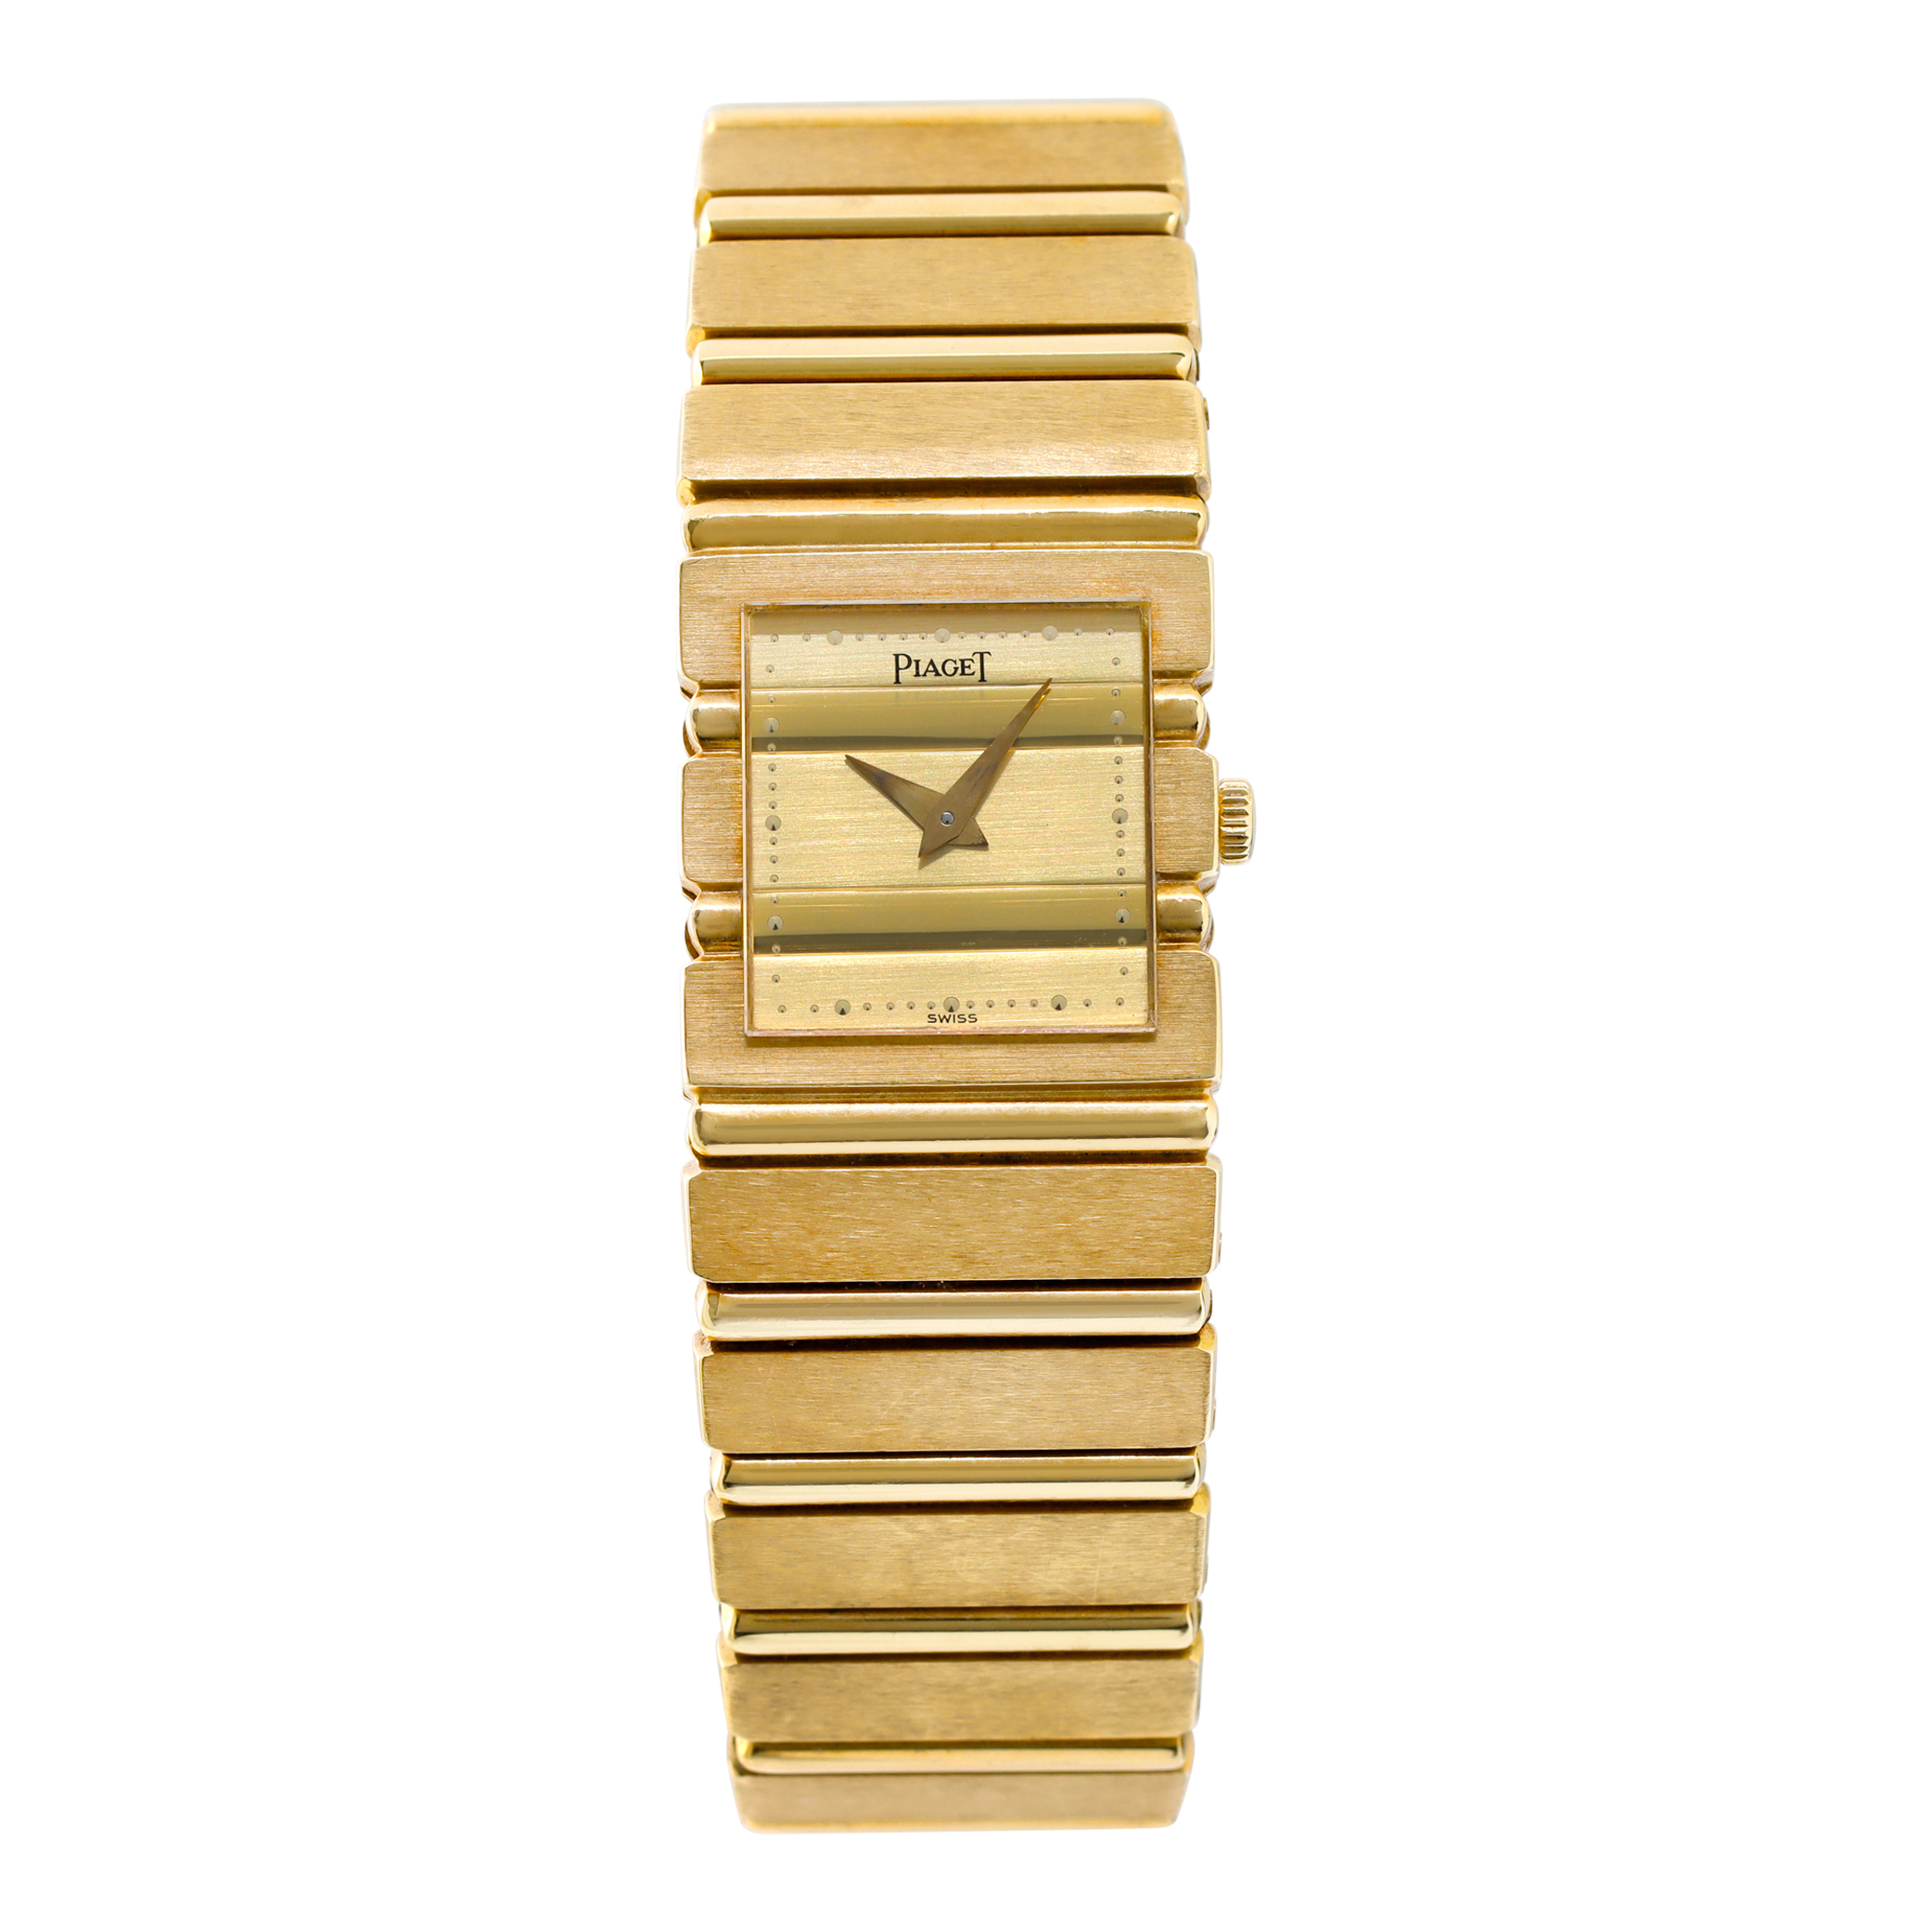 Piaget Polo 20mm 49550 (Watches)